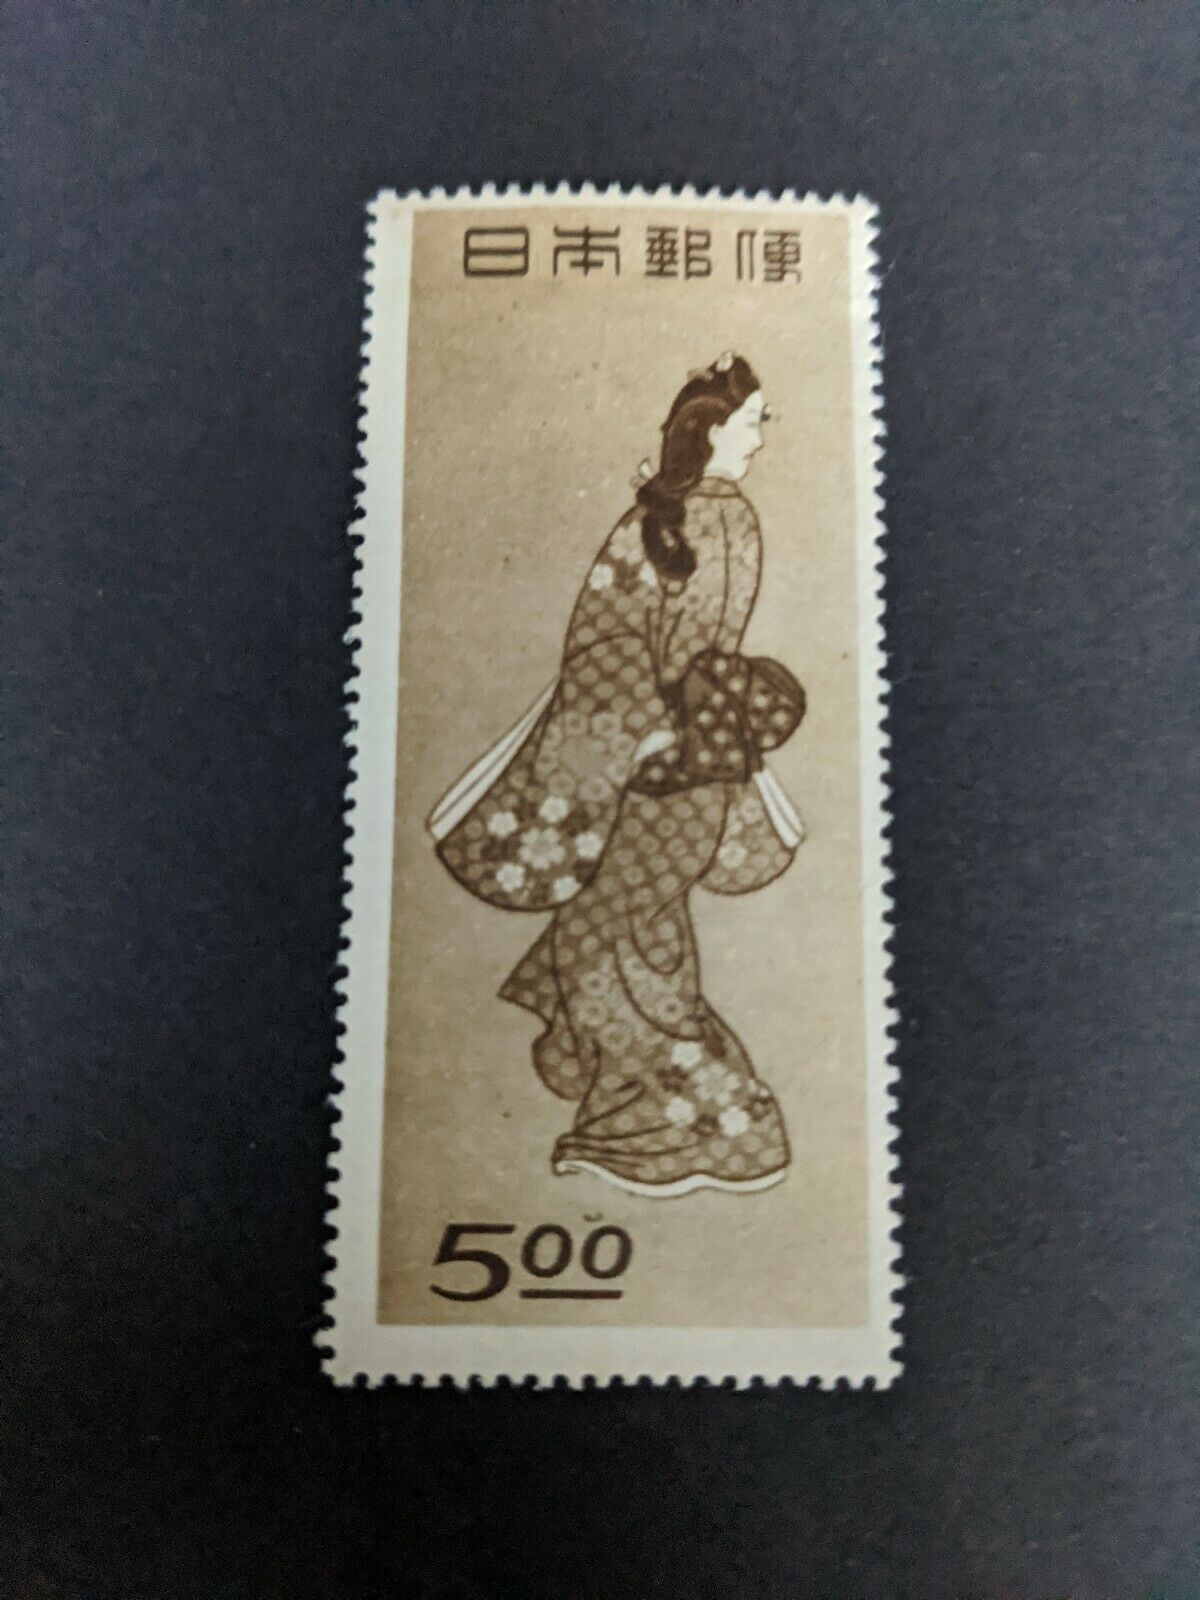 Japan 5 Yen 1948 Philatelic Week Painting Stamp SG £95 Mint Unhinged Condition